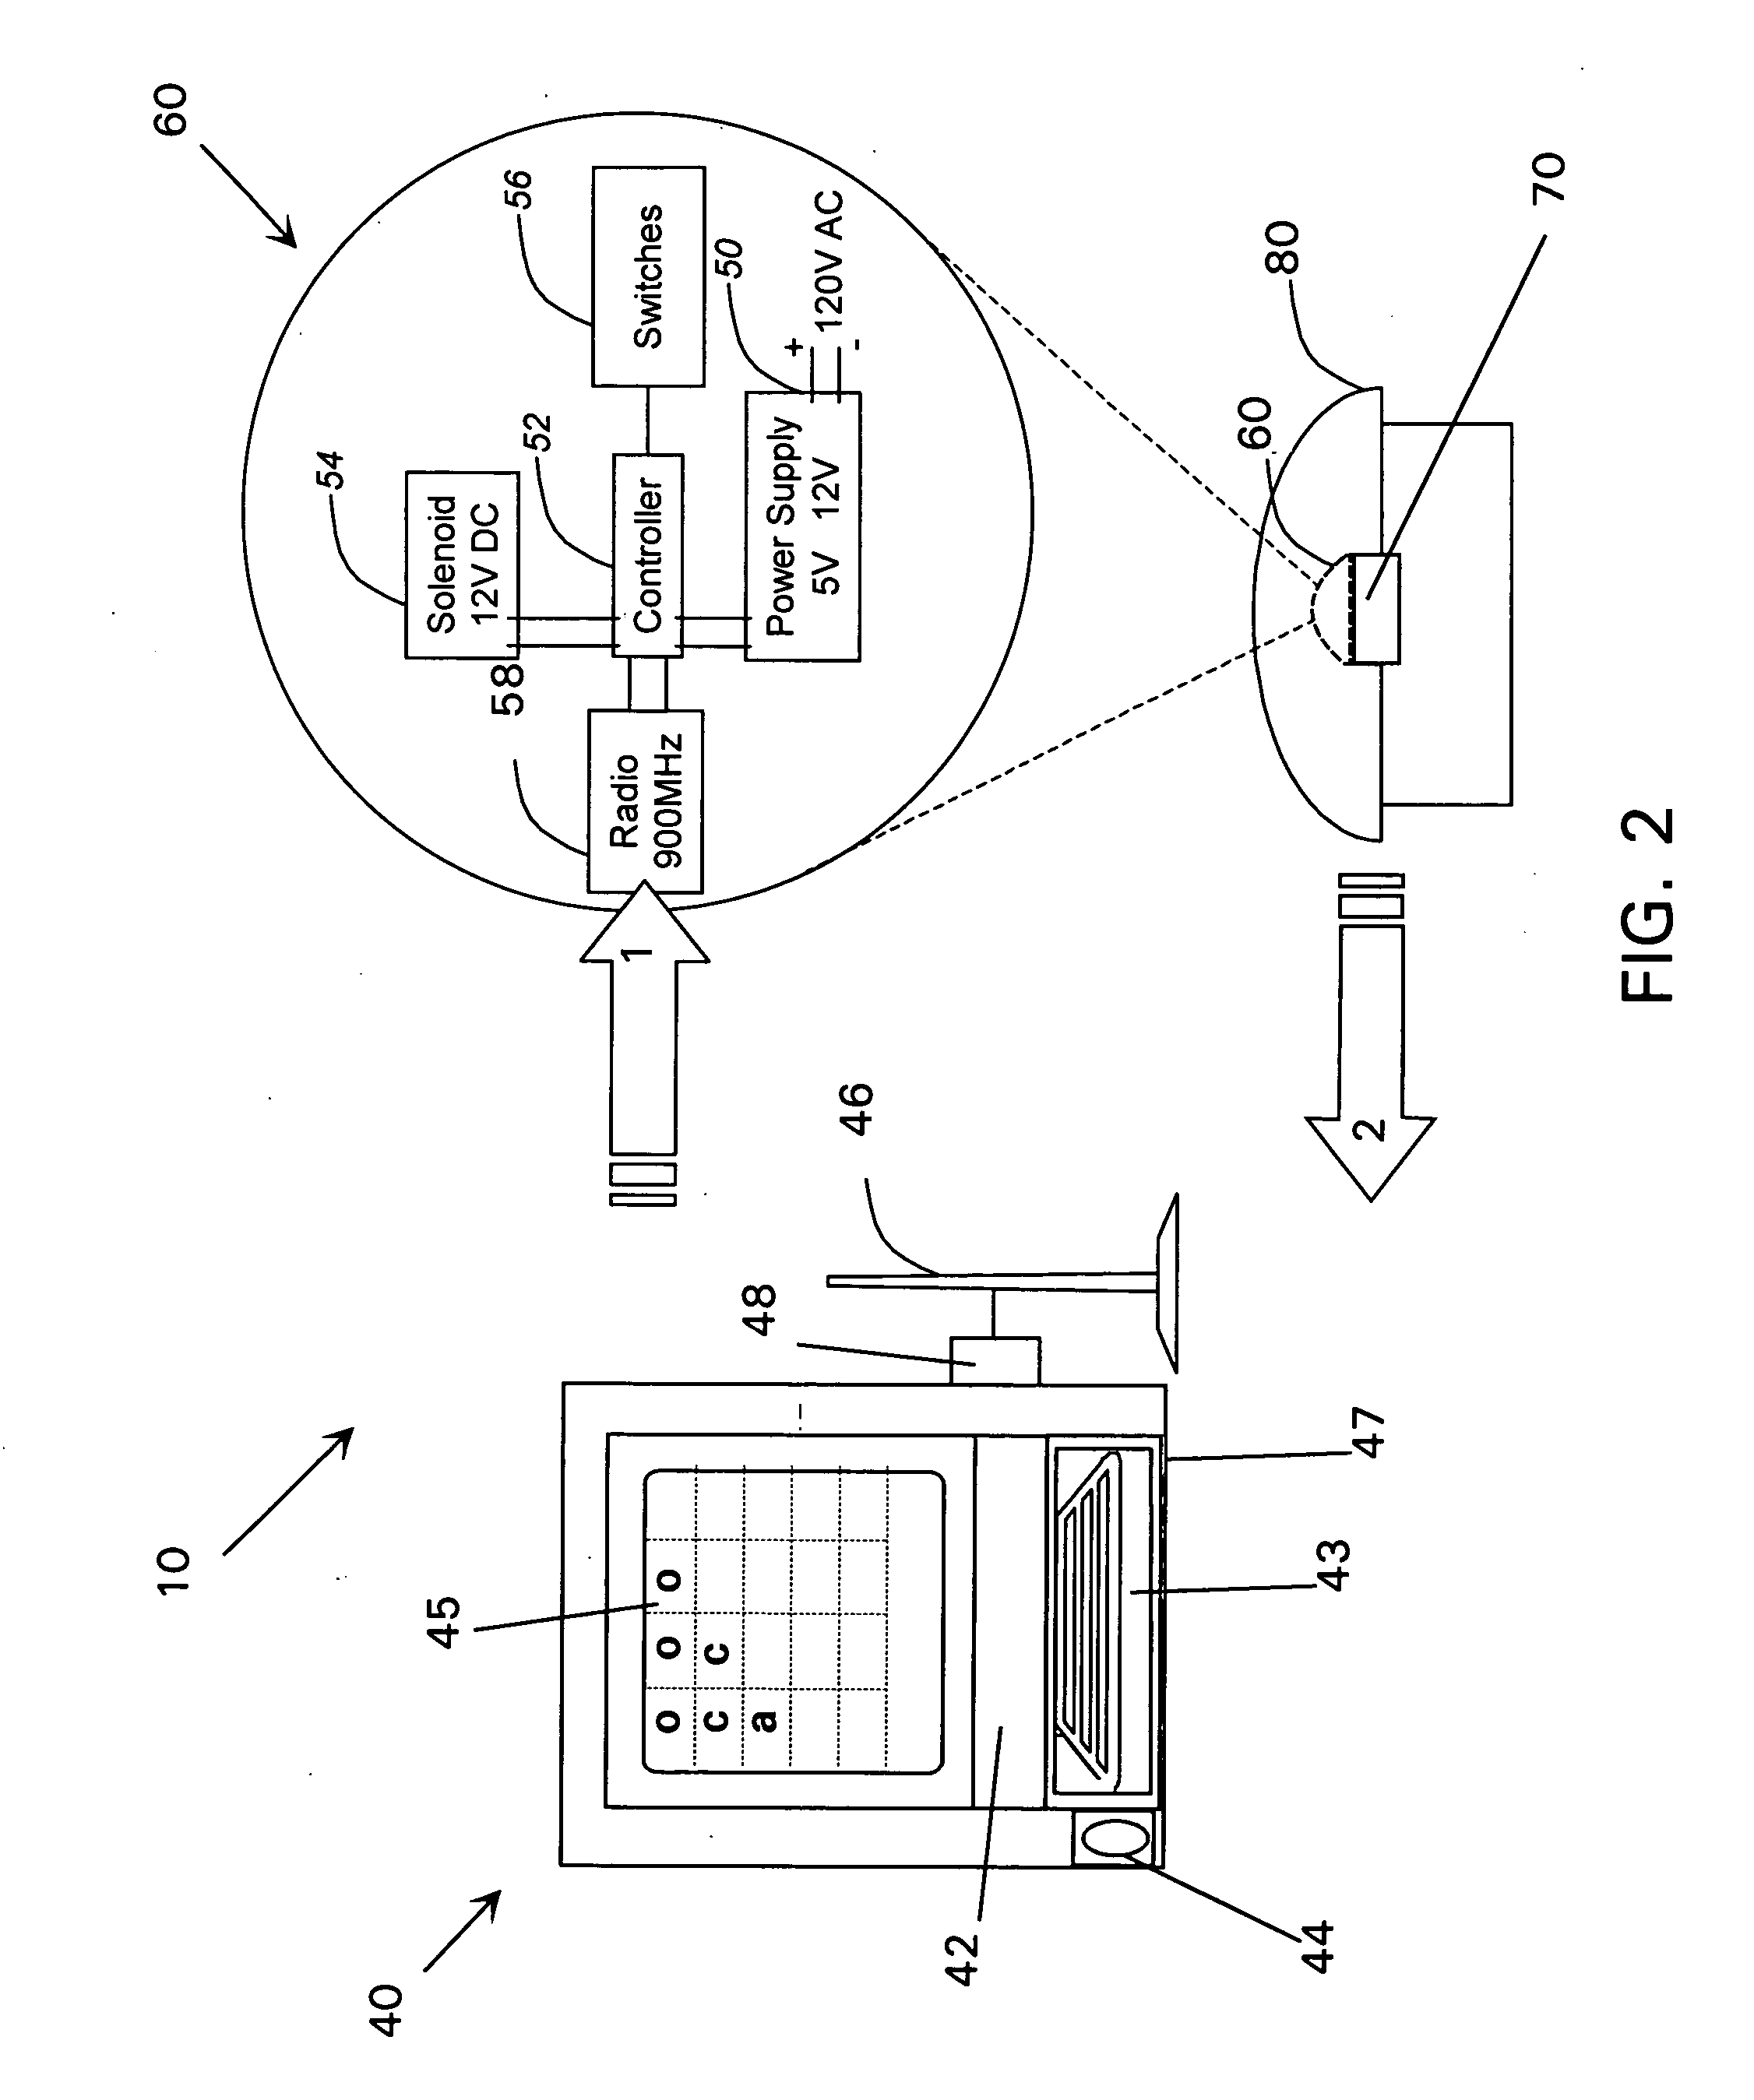 Gaming security system and associated methods for selectively granting access